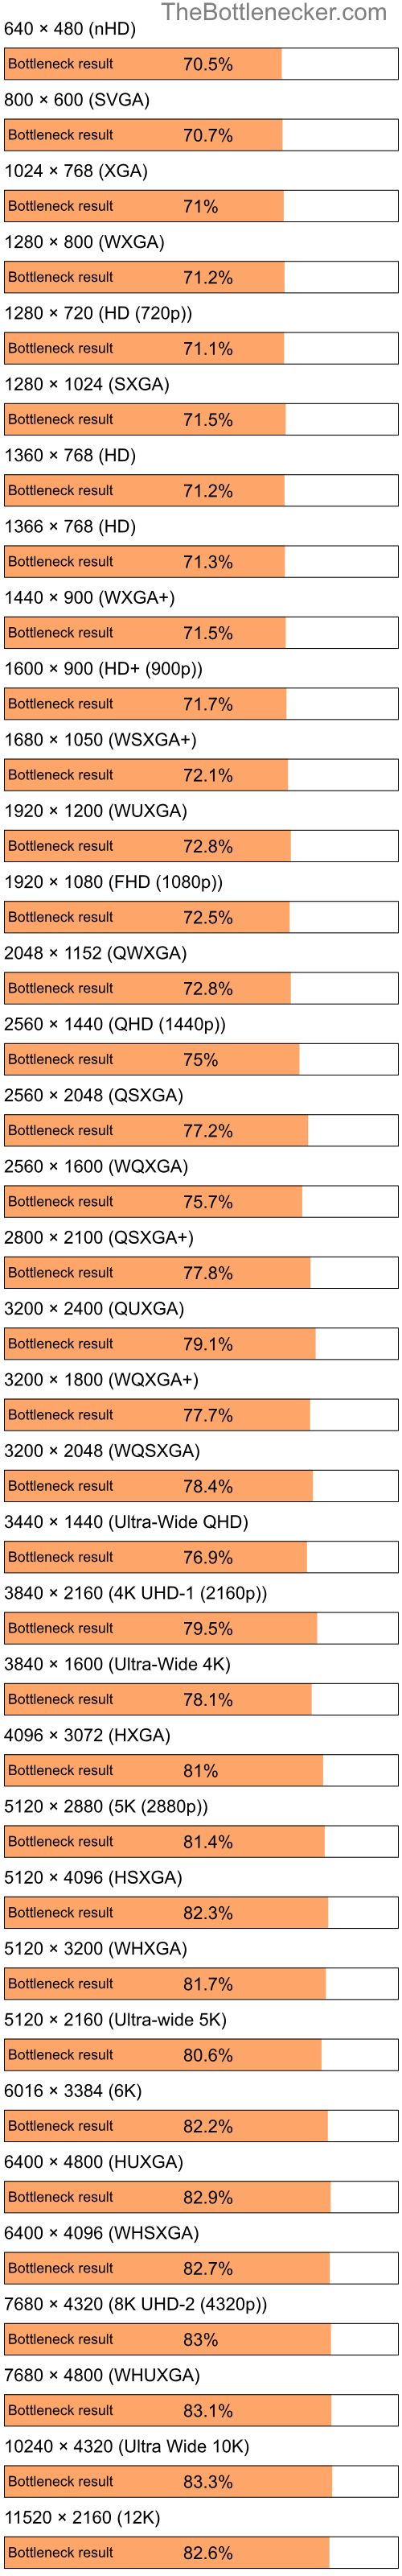 Bottleneck results by resolution for Intel Pentium 4 and AMD Radeon 9600 PRO Family in Processor Intense Tasks